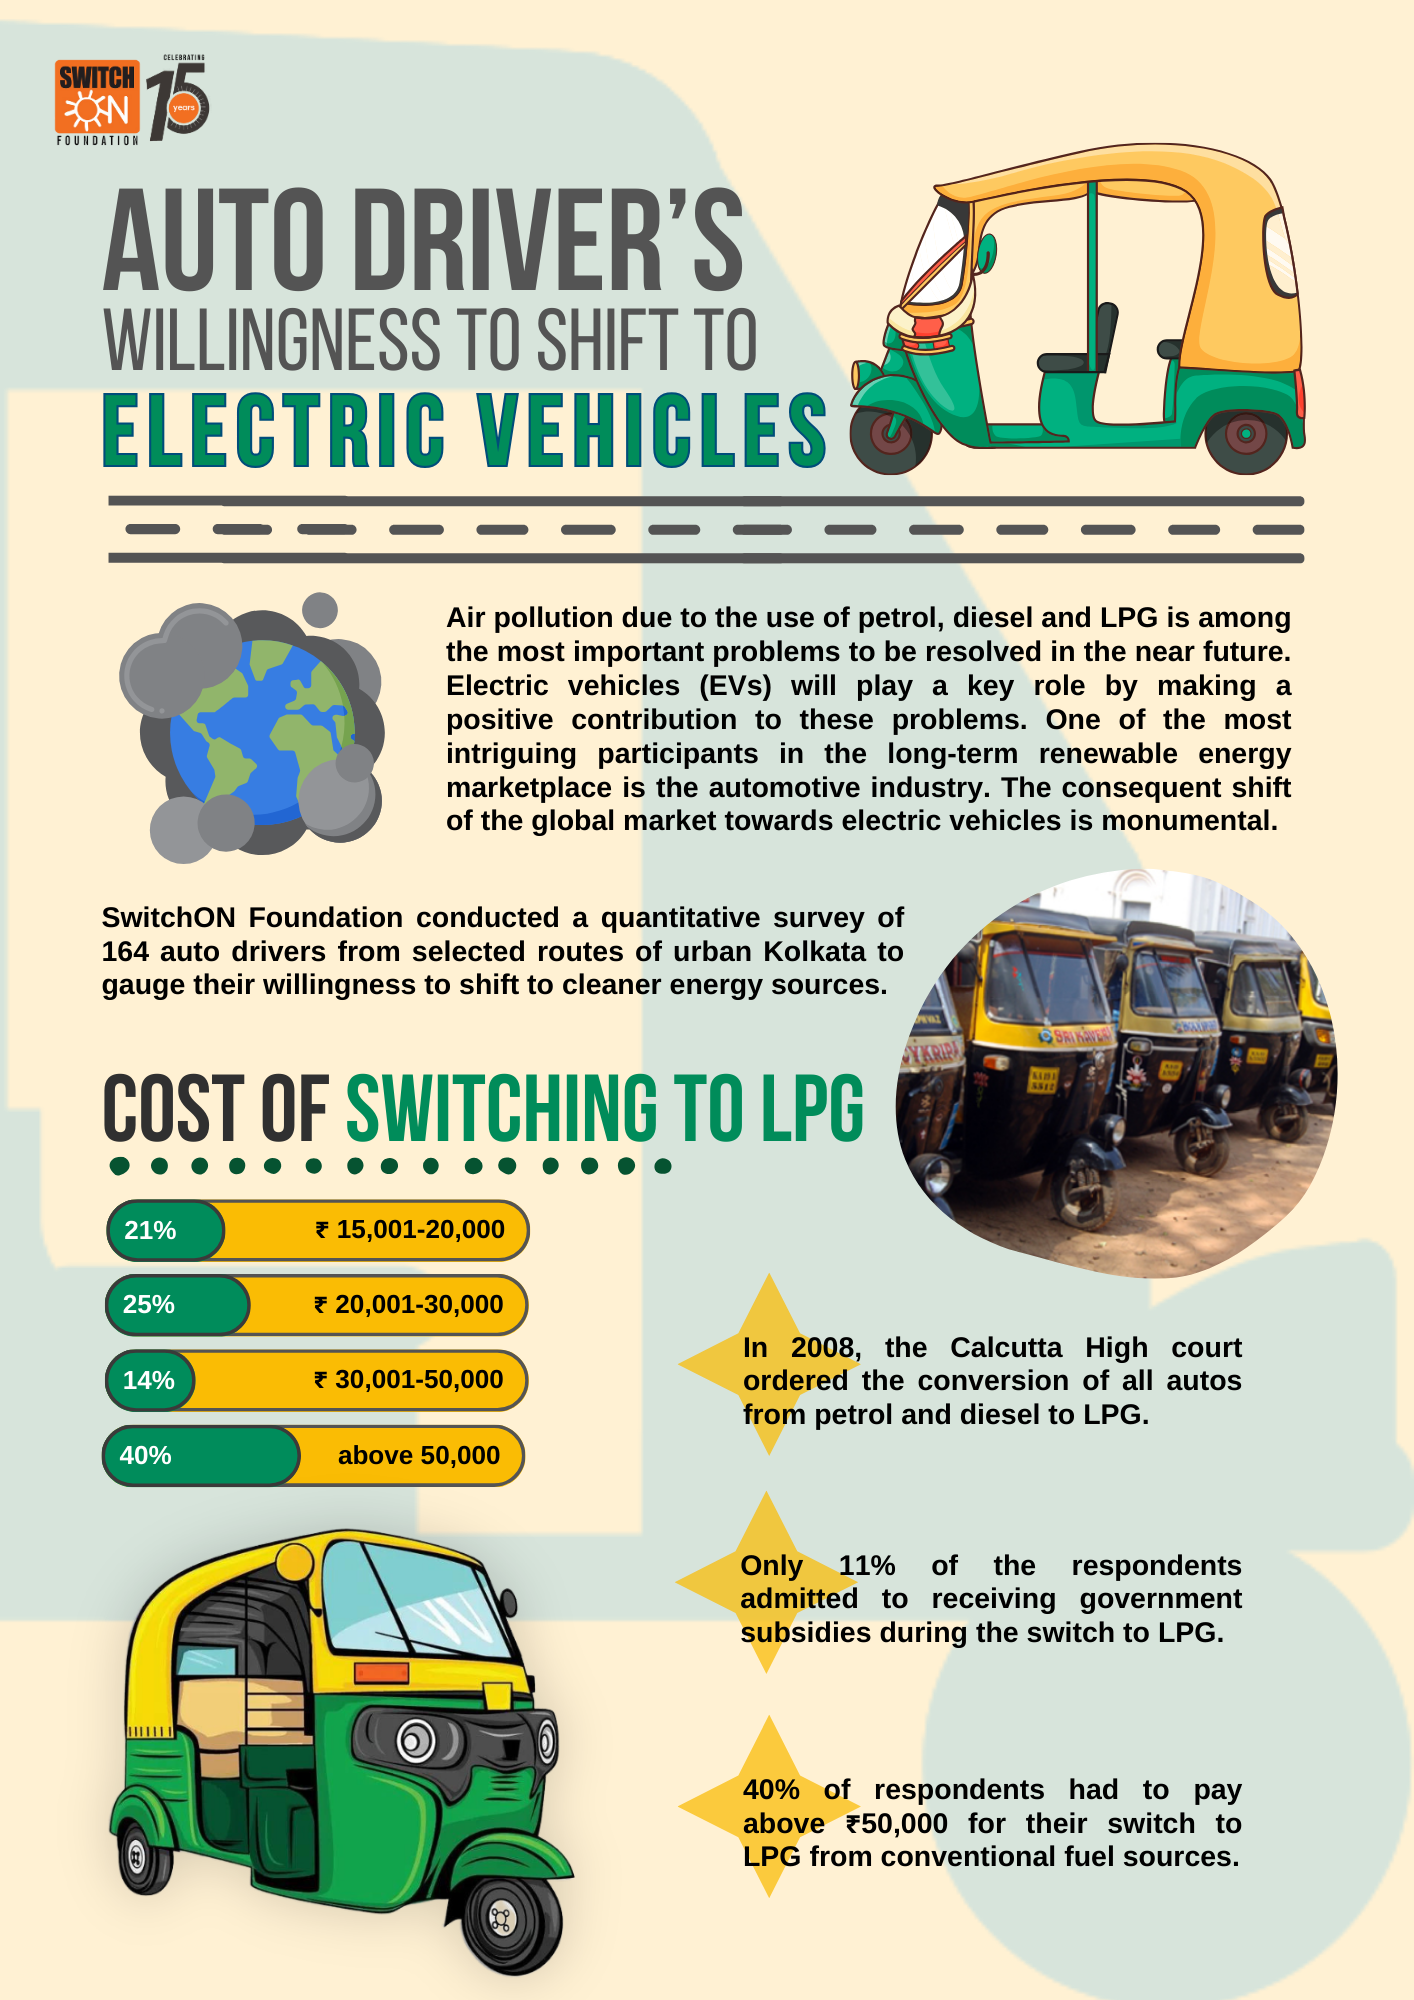 Auto Driver’s willingness to shift to Electric Vehicles